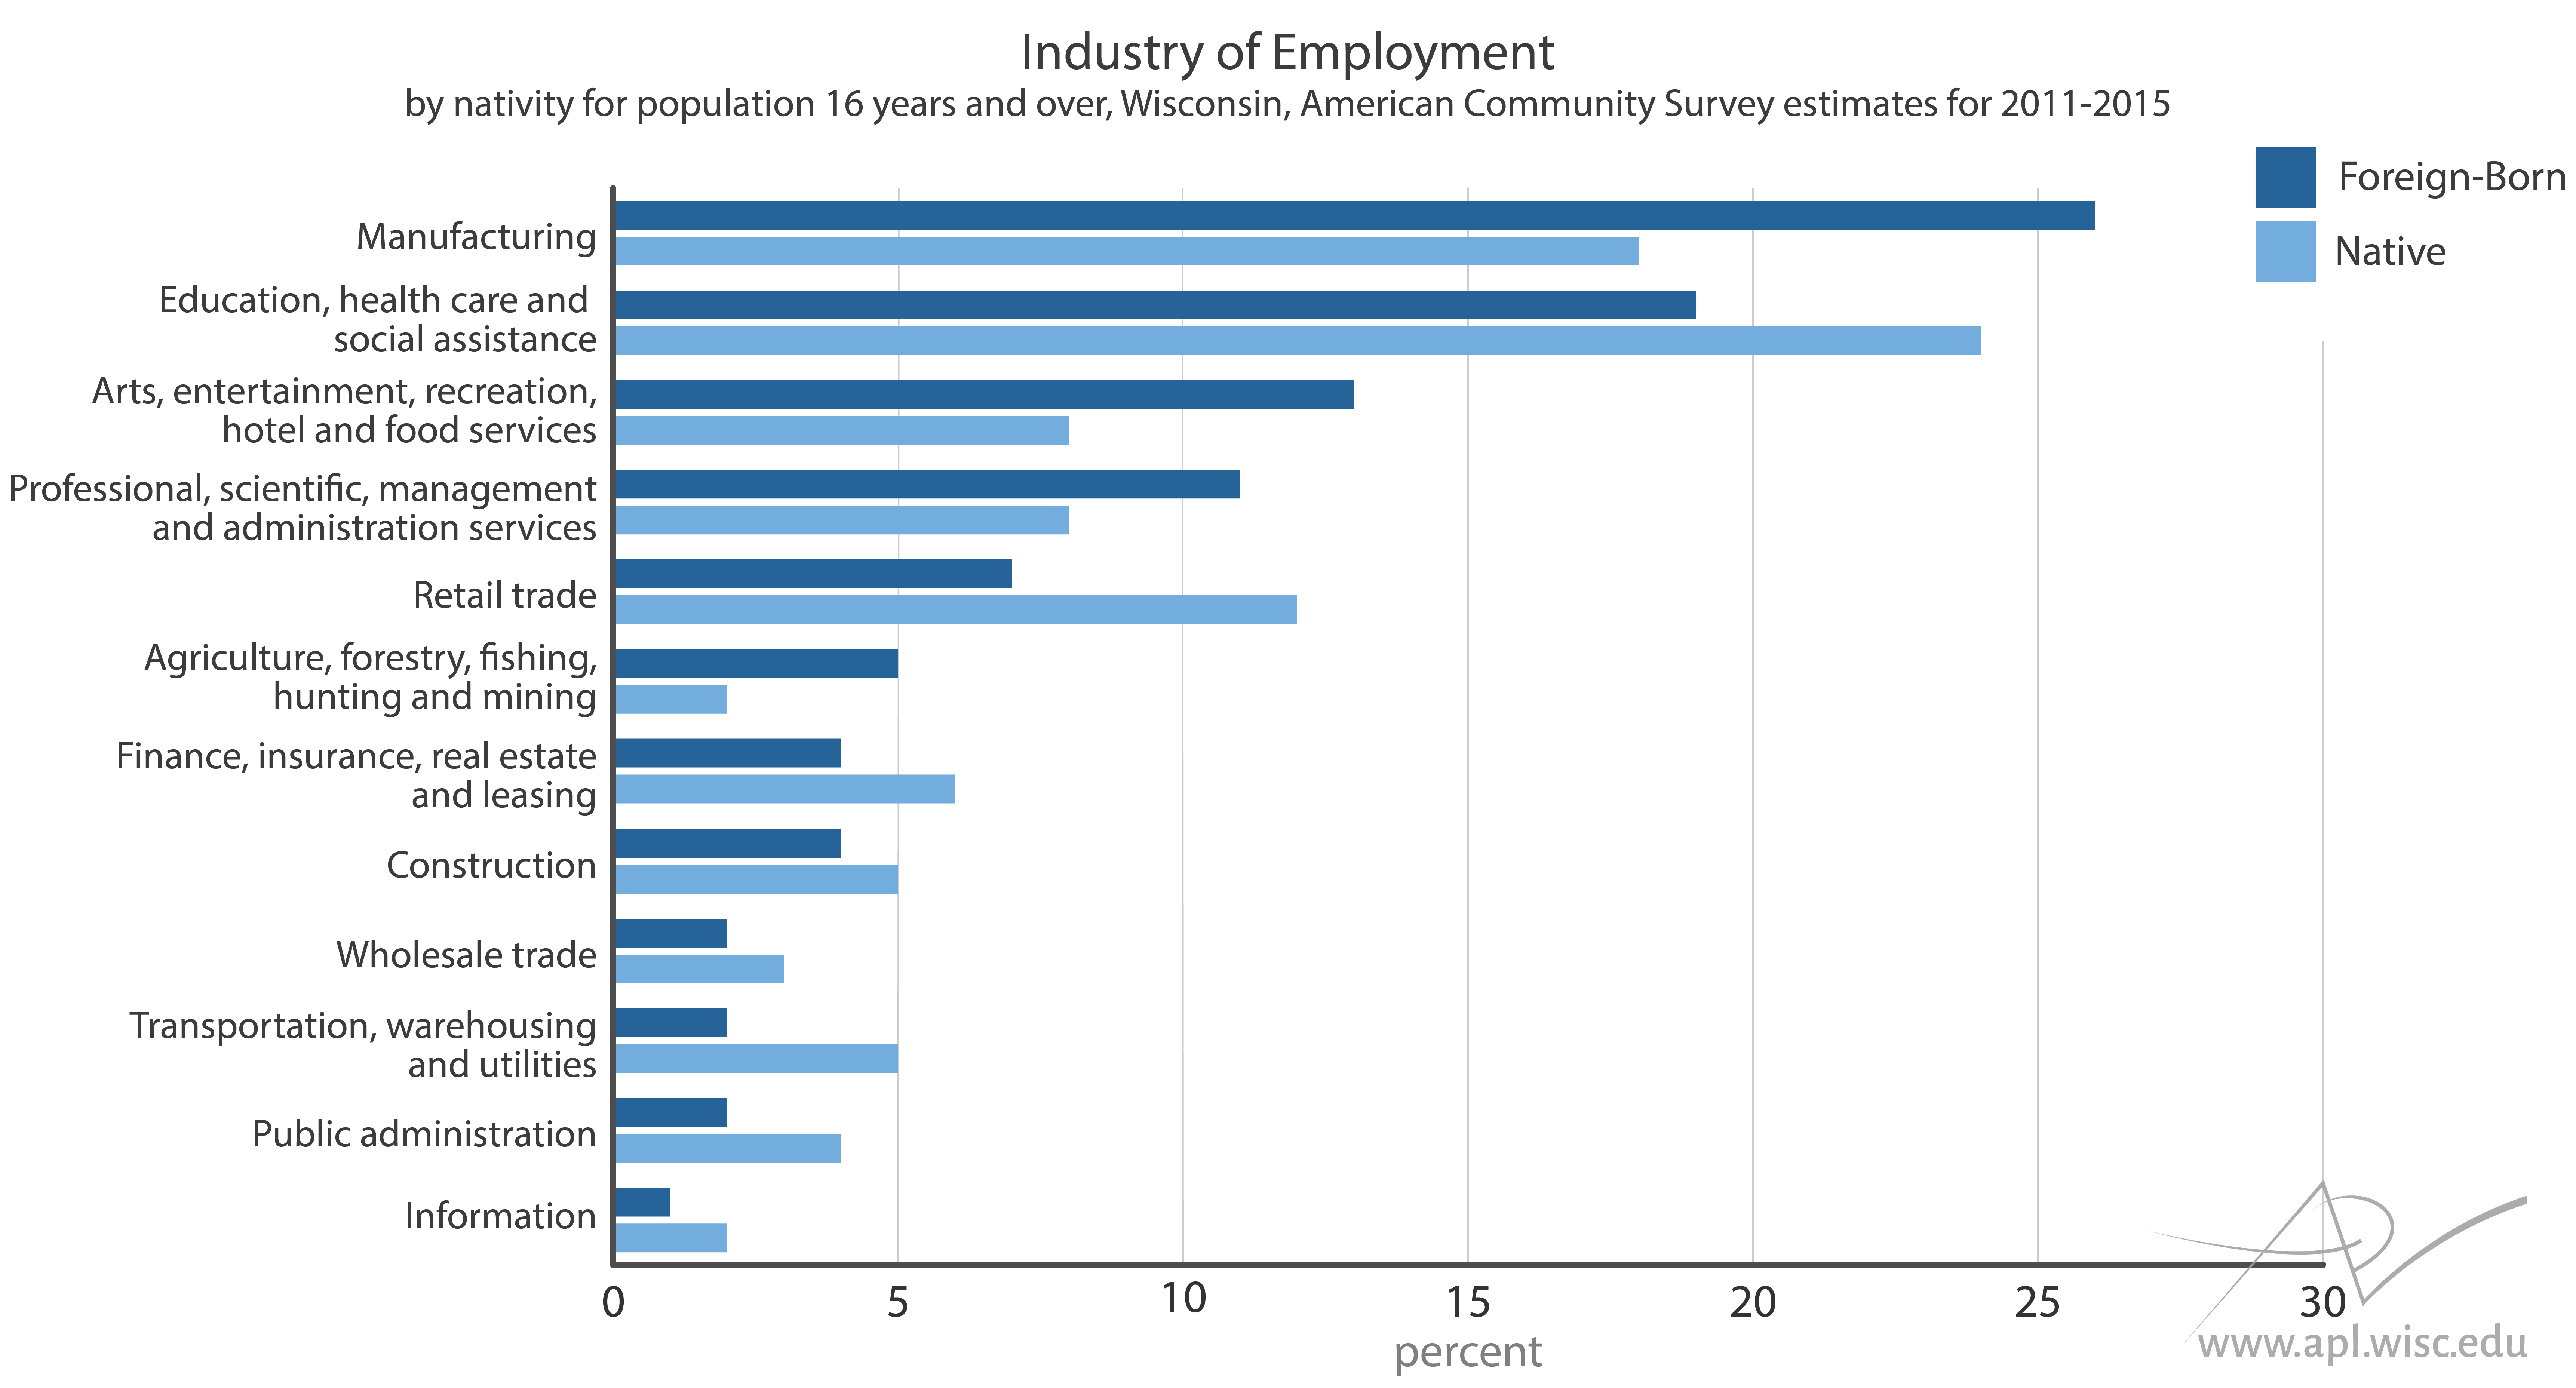 chart showing industry of employment for native-born and foreign-born residents in Wisconsin